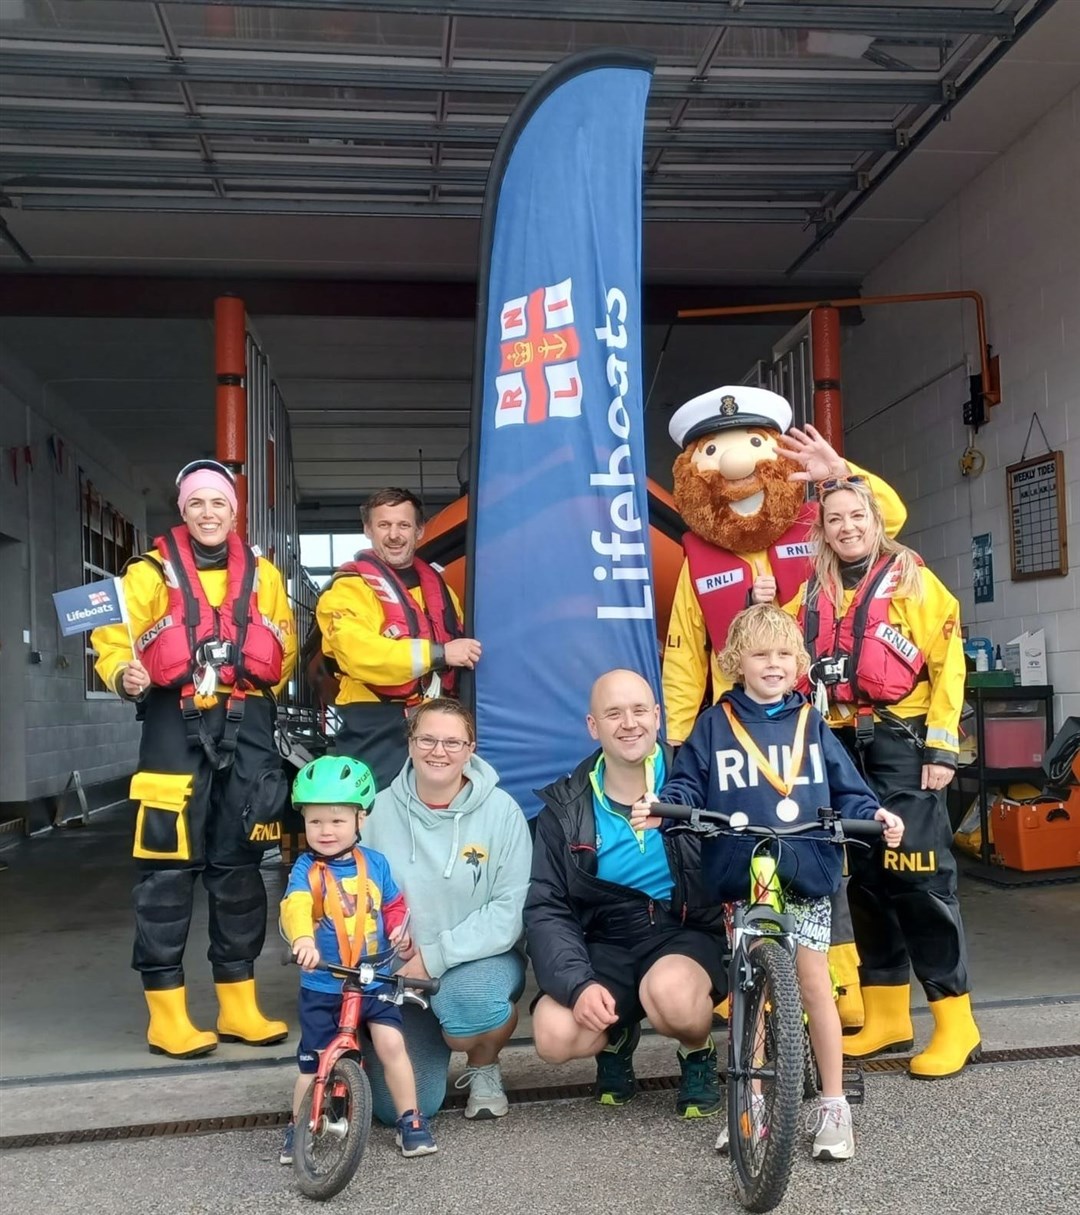 The lads were greeted at the Kessock lifeboat station after their remarkable triathlon effort.